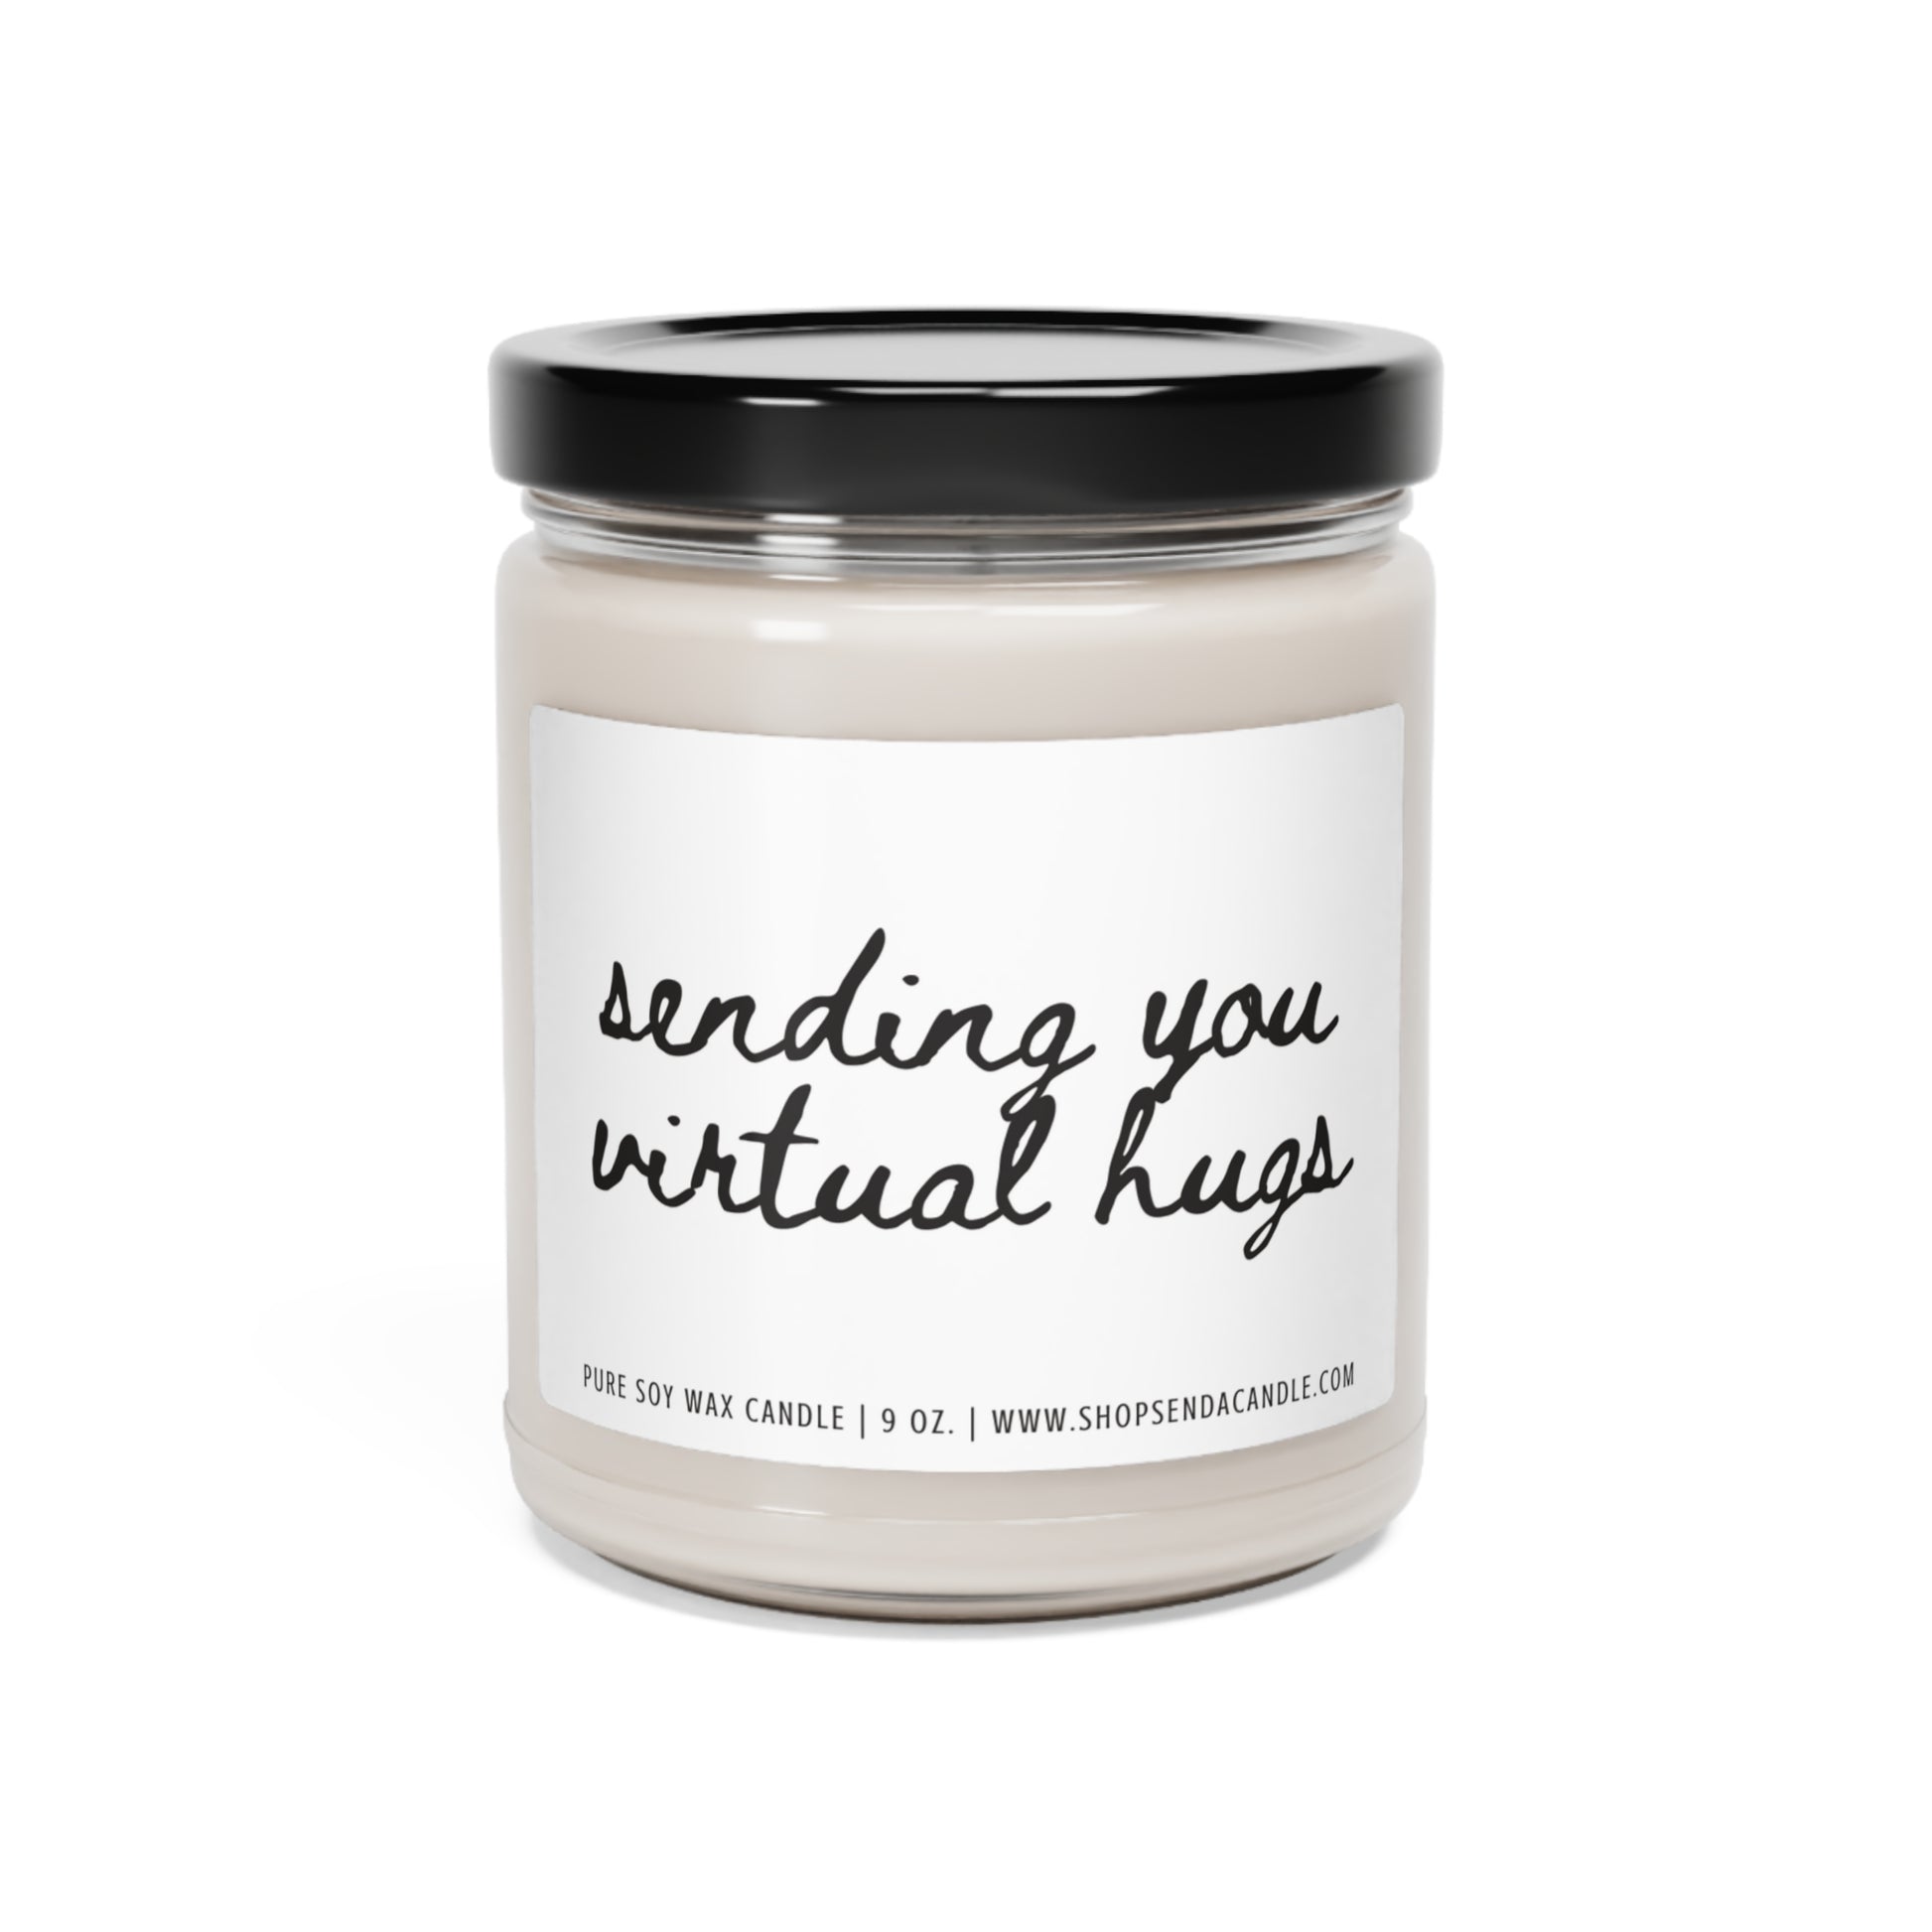 Get Well Soon Gifts For Him | Send A Candle